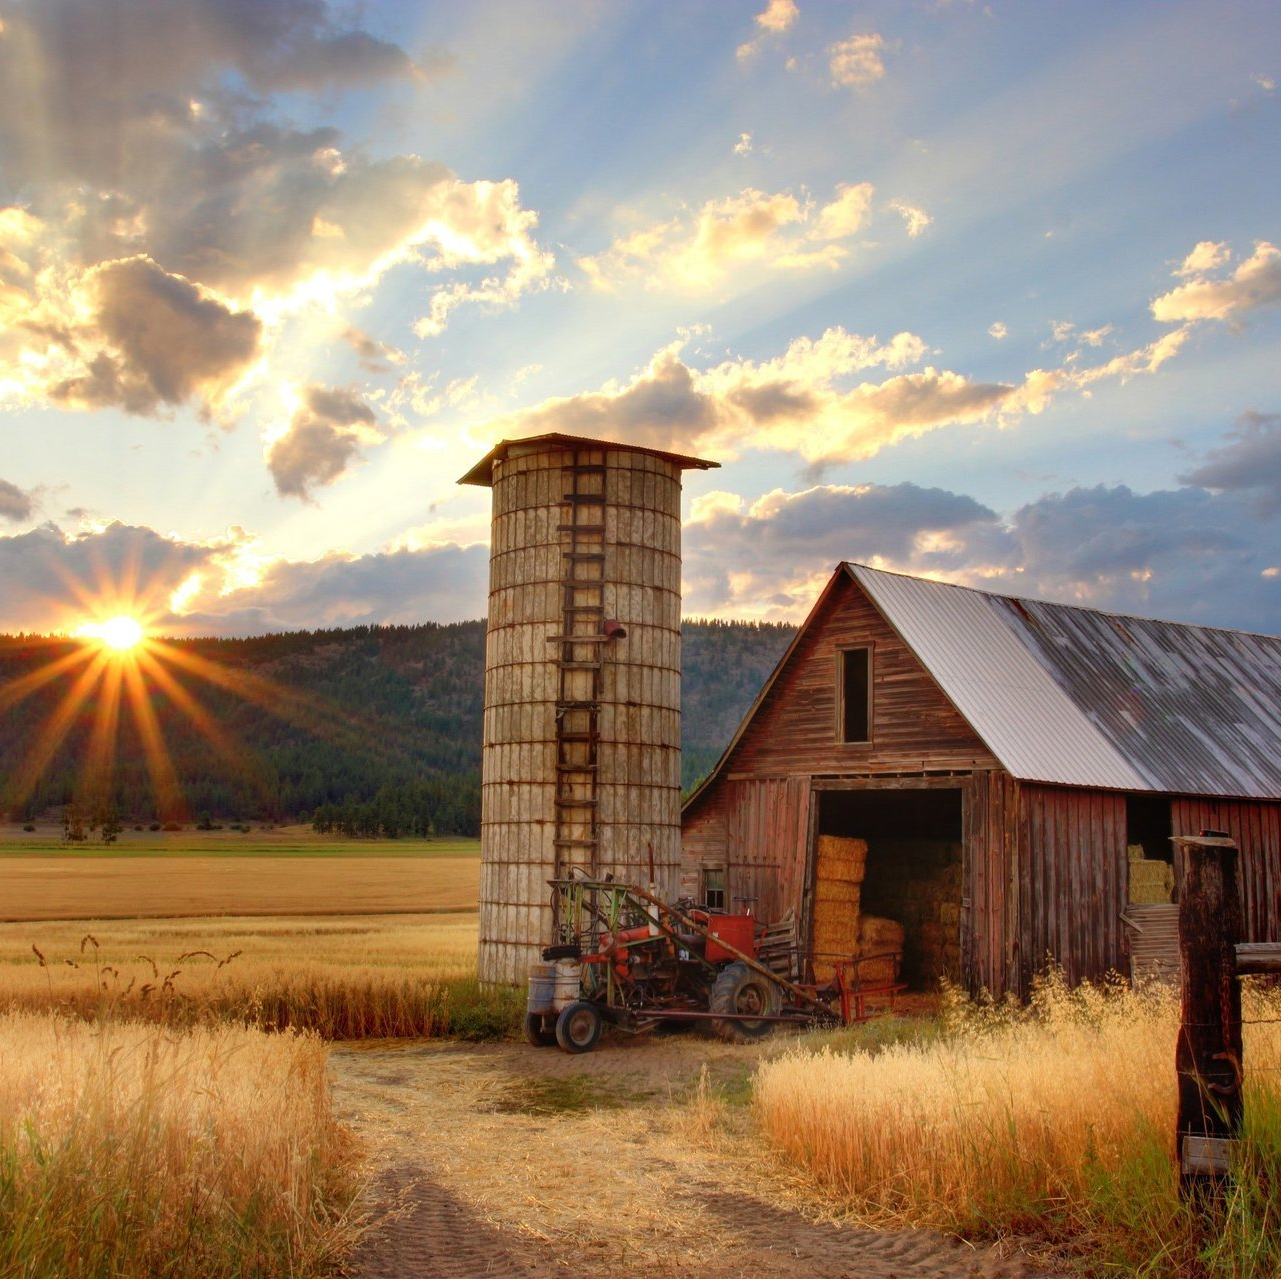 the sun is setting behind a barn and silo